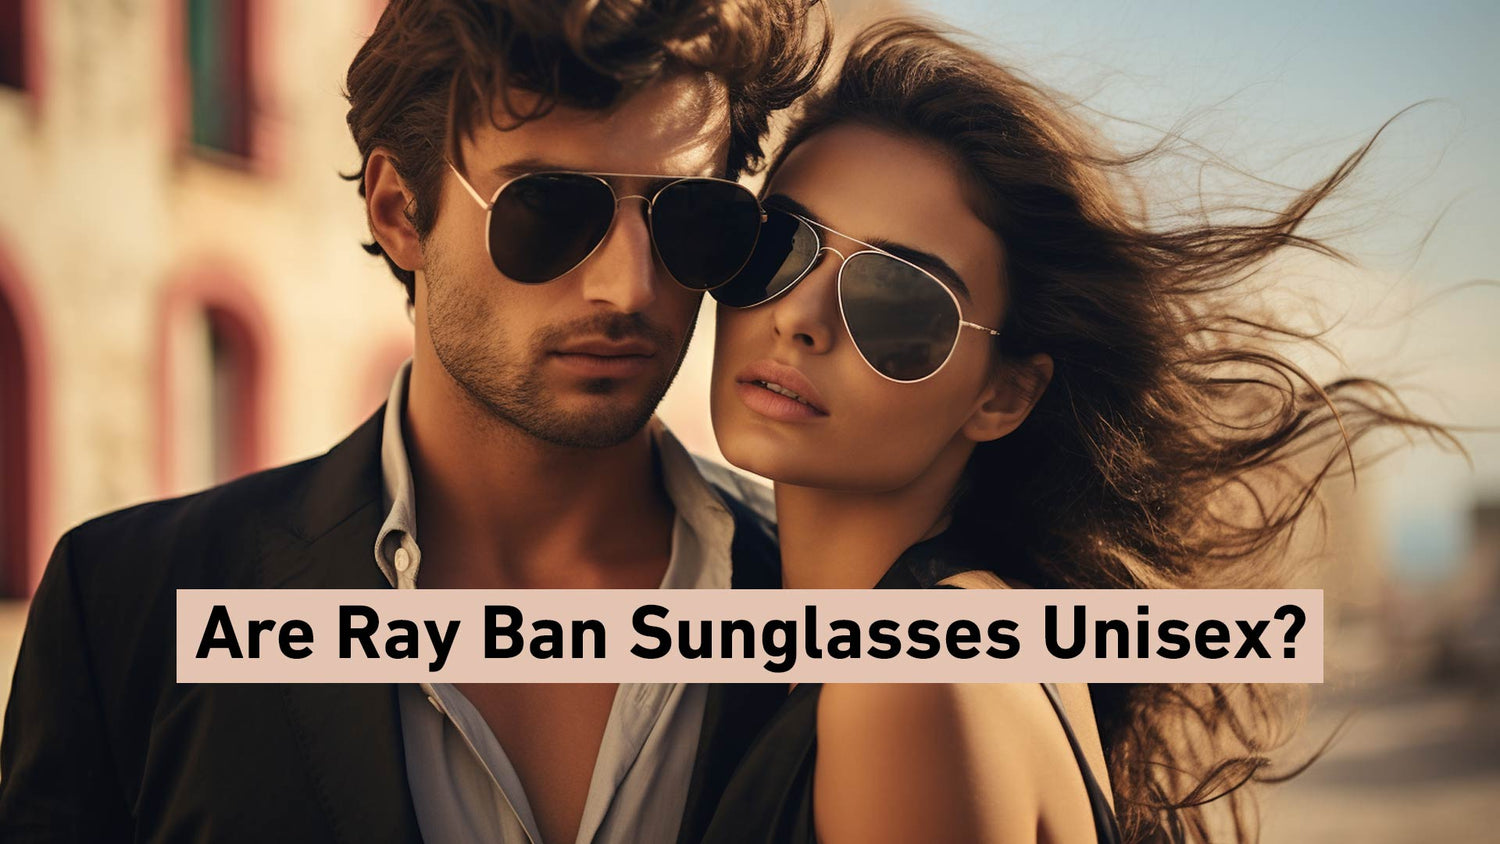 Are Ray-Ban Sunglasses Good For Running